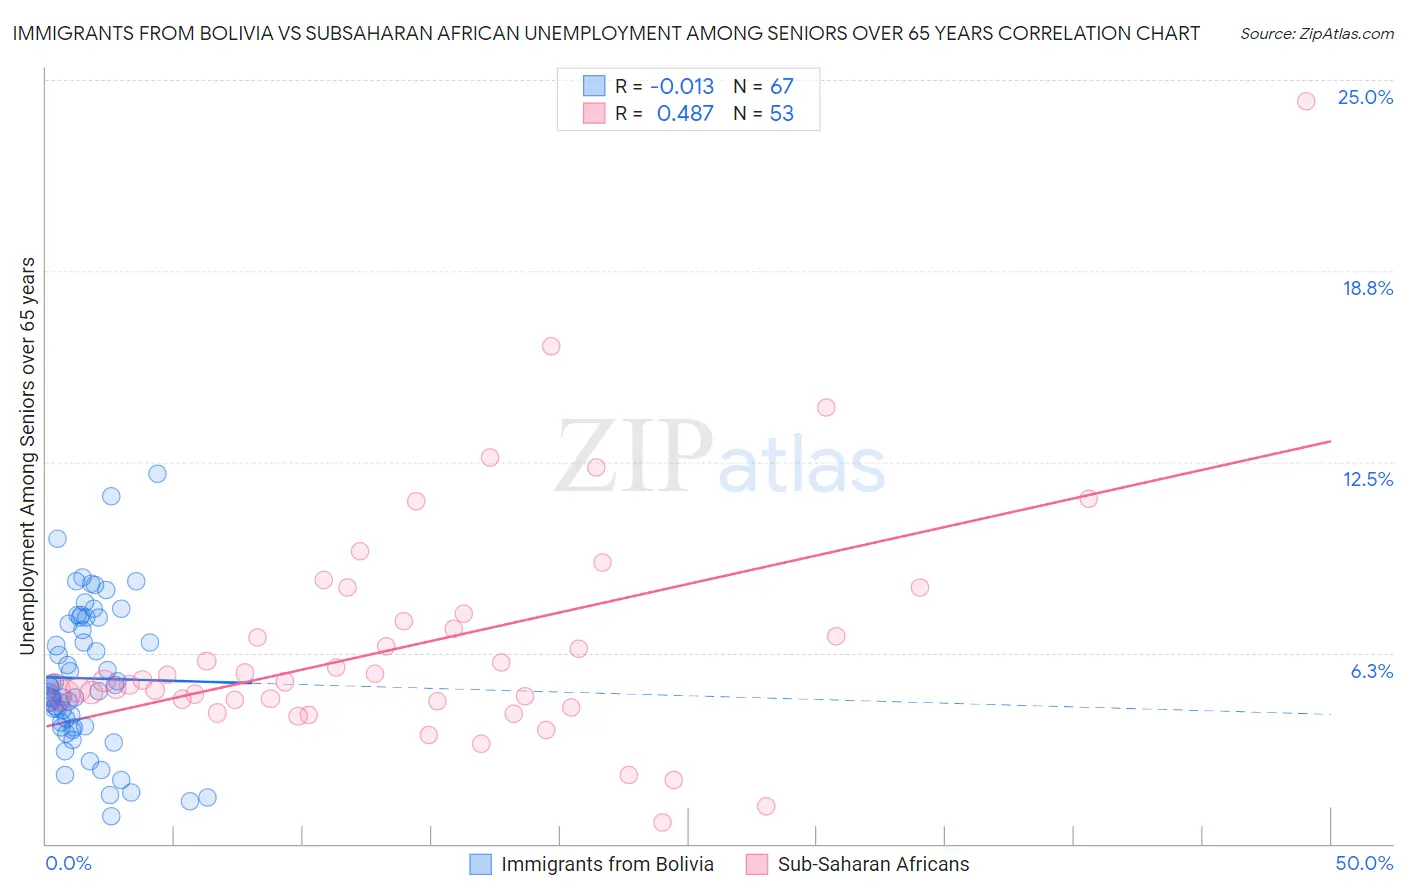 Immigrants from Bolivia vs Subsaharan African Unemployment Among Seniors over 65 years